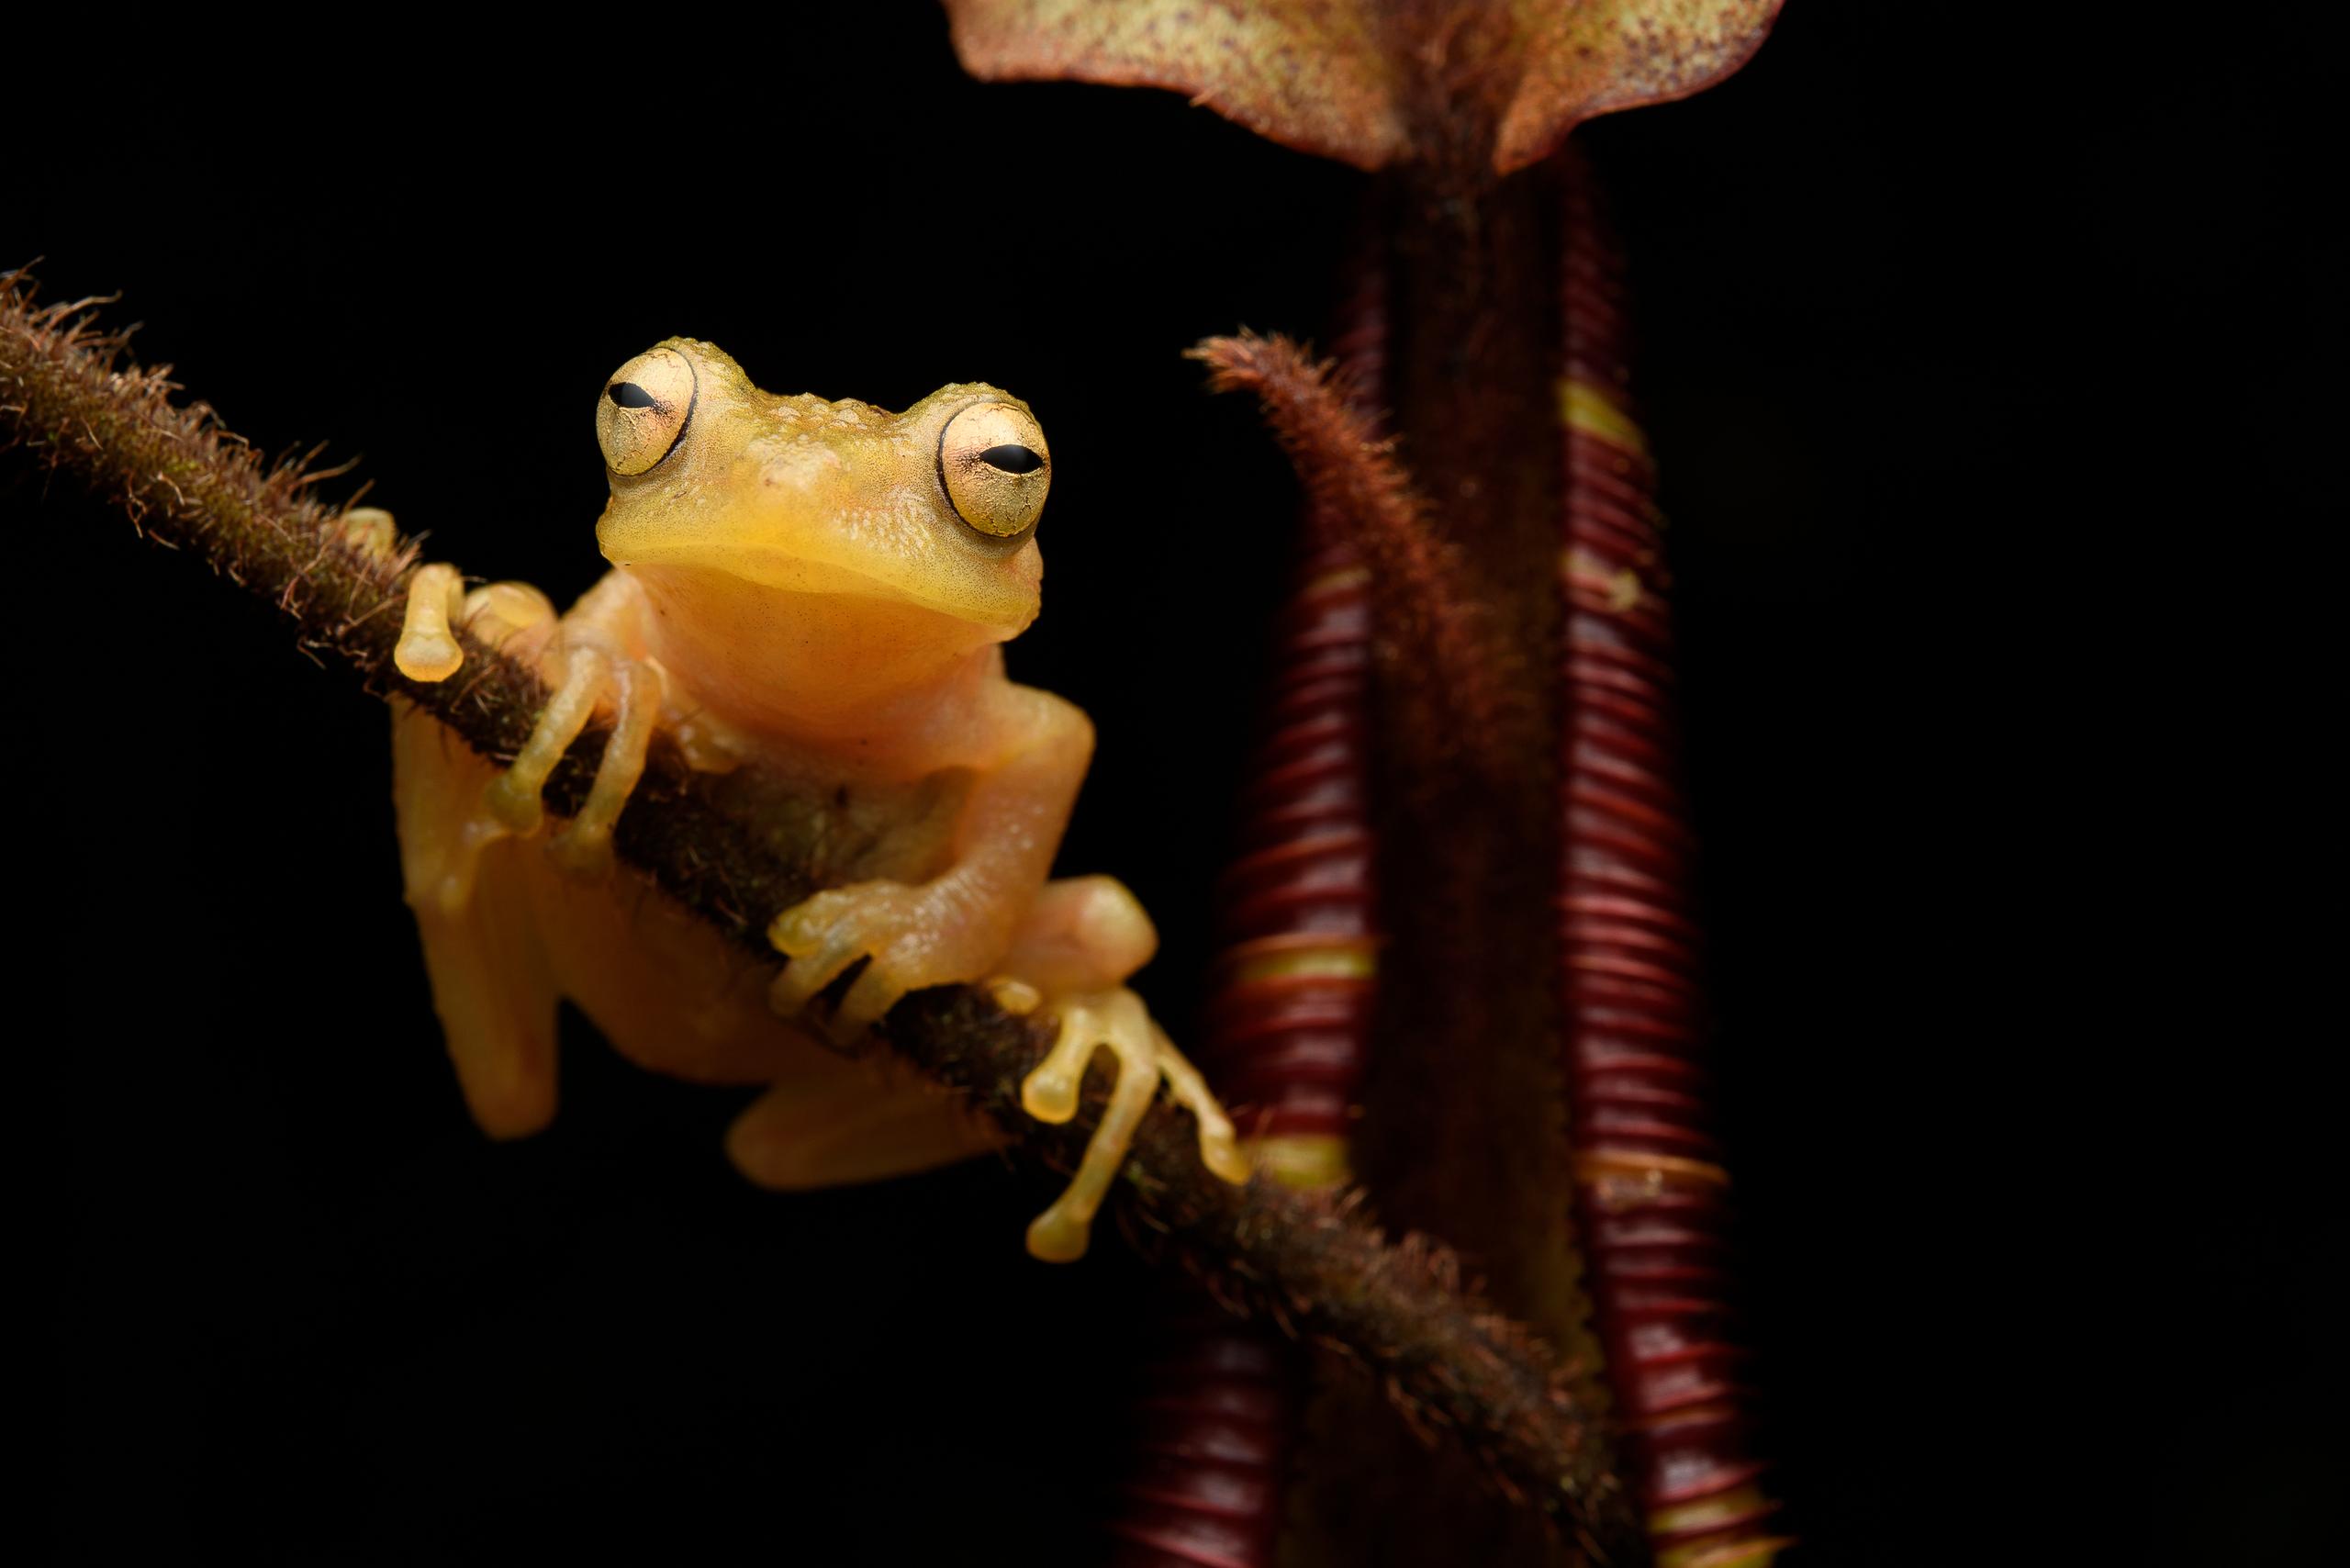 New throated. Nepenthes Frog. A New Frog species in 2016.